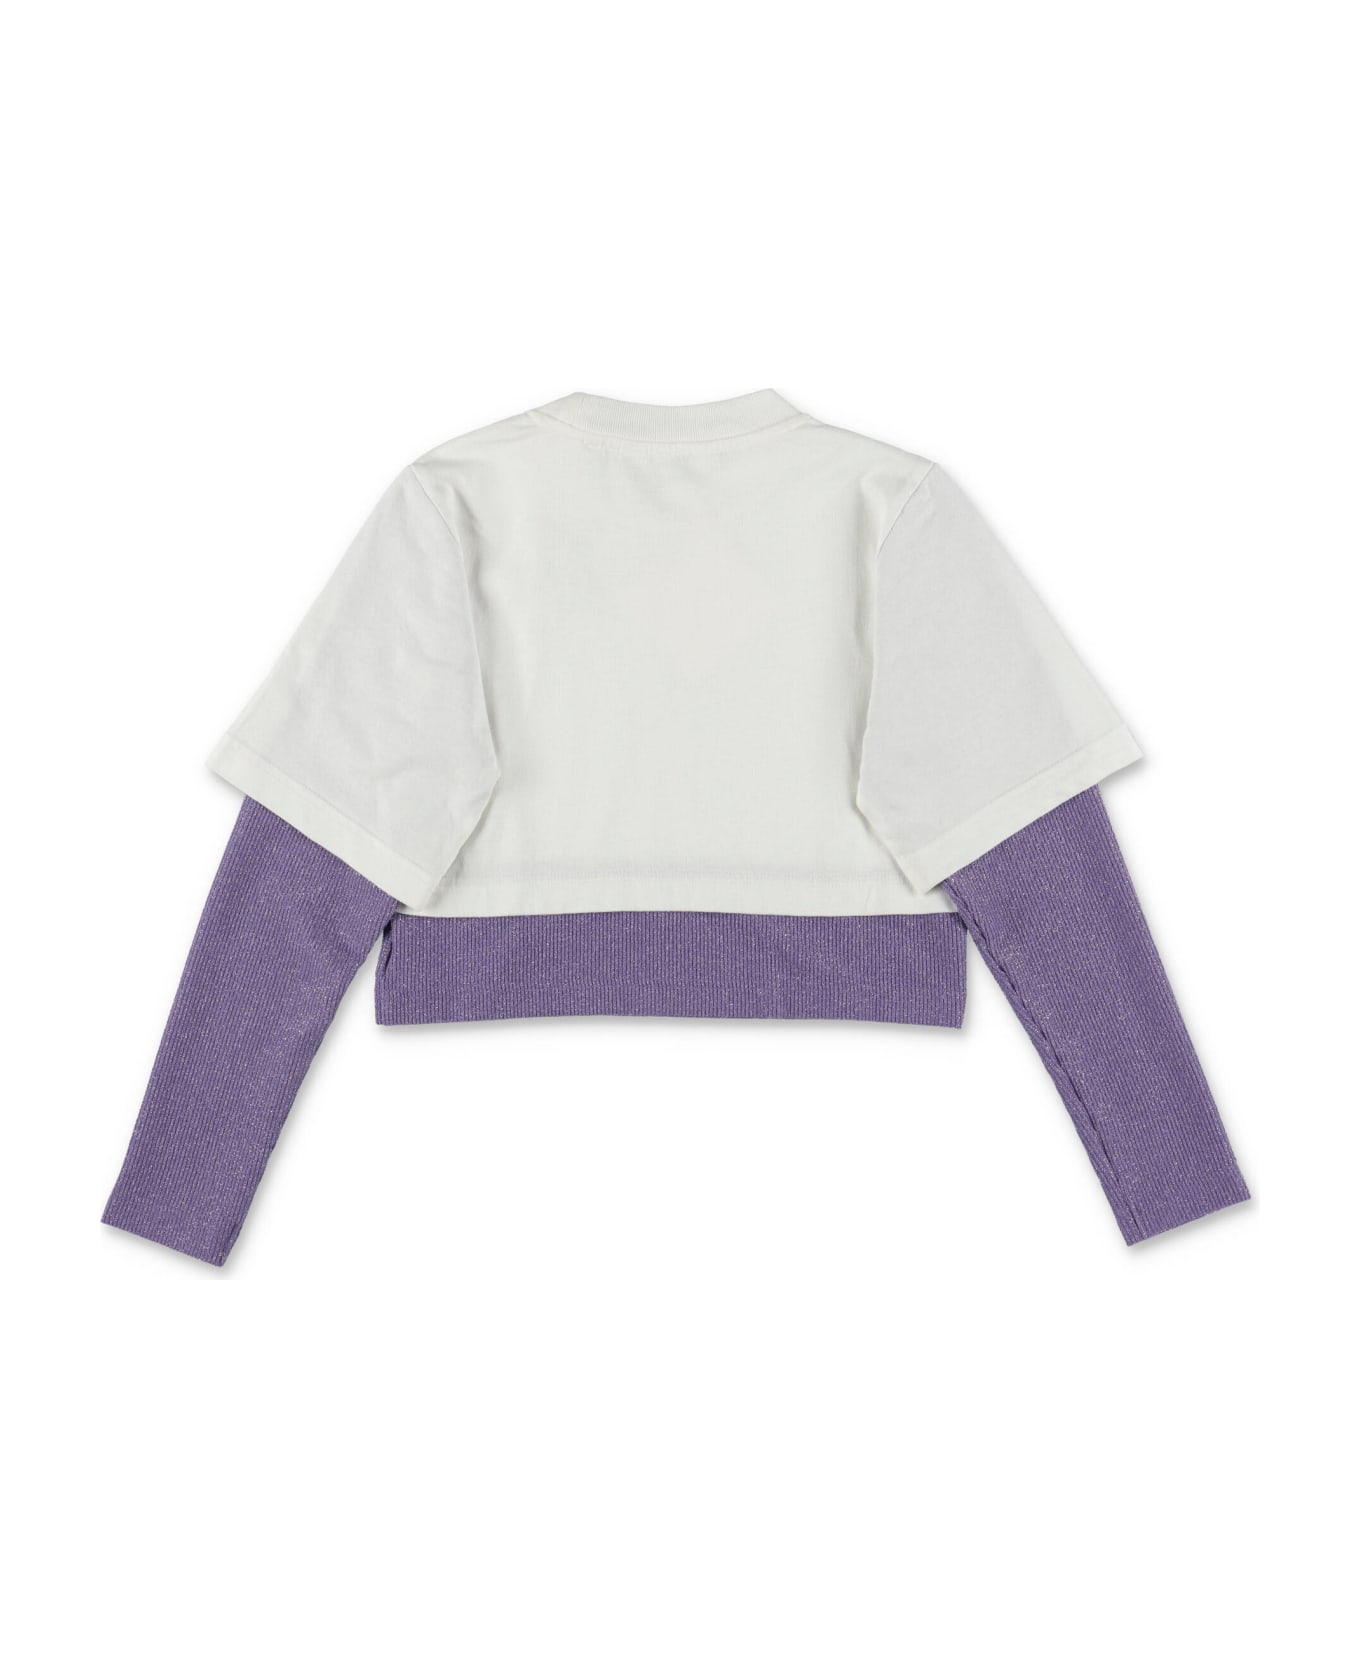 Palm Angels T-shirt Bianca Effetto Sovrapposto In Jersey Di Cotone Bambina - Bianco